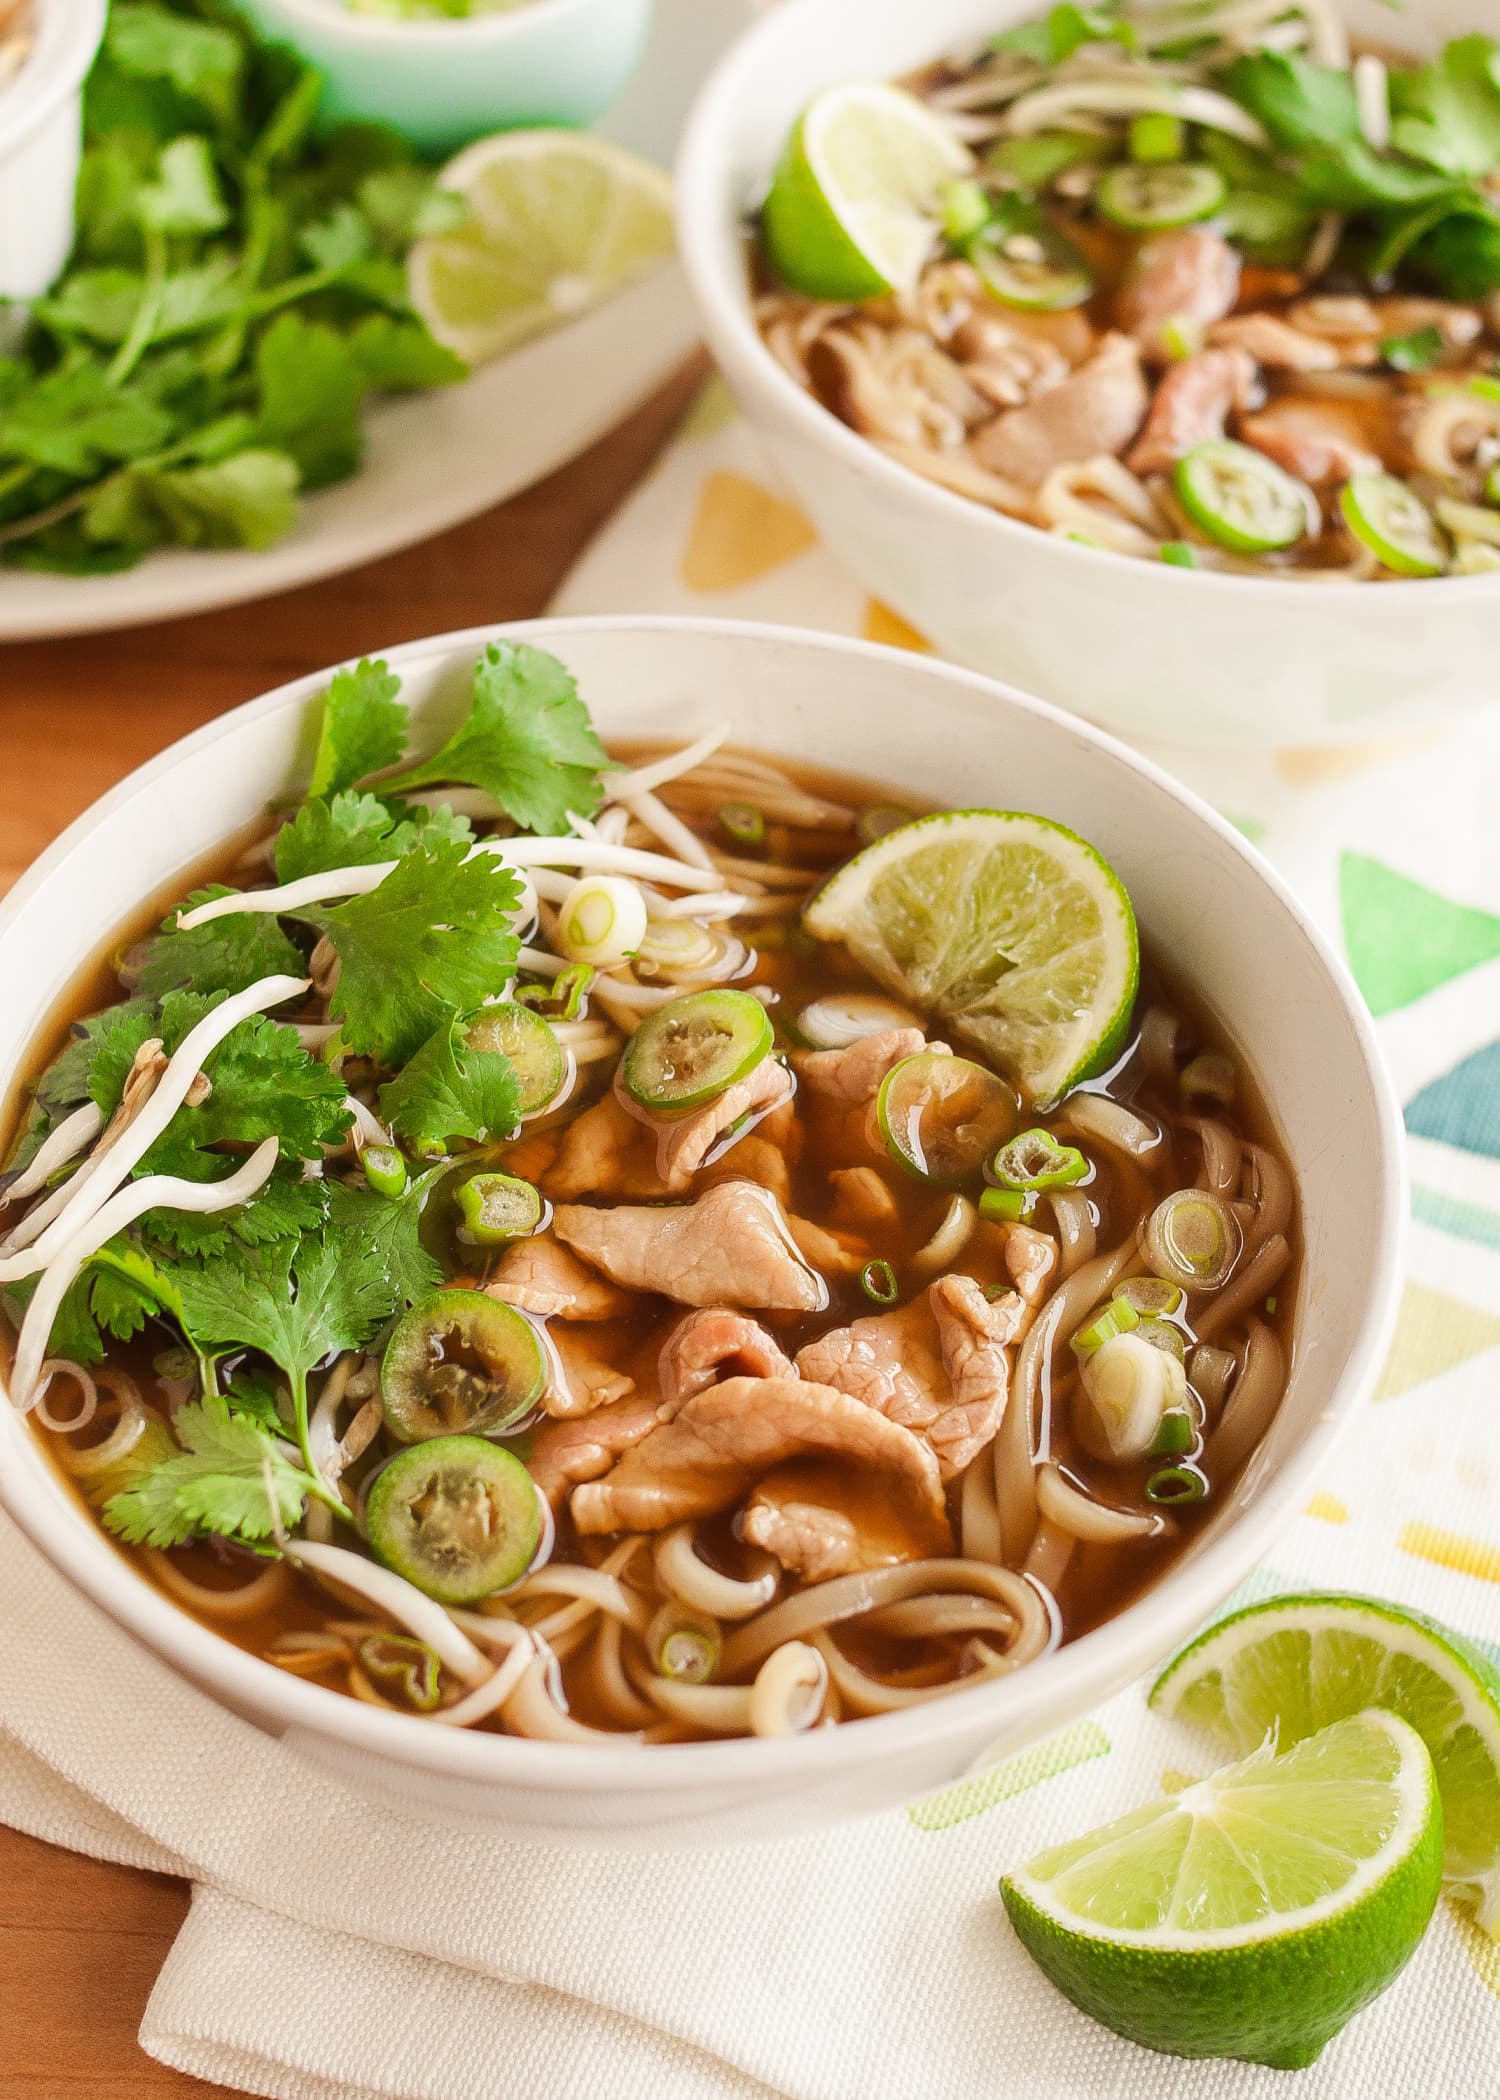 Pho Recipe - How To Make Vietnamese Beef Noodle Pho